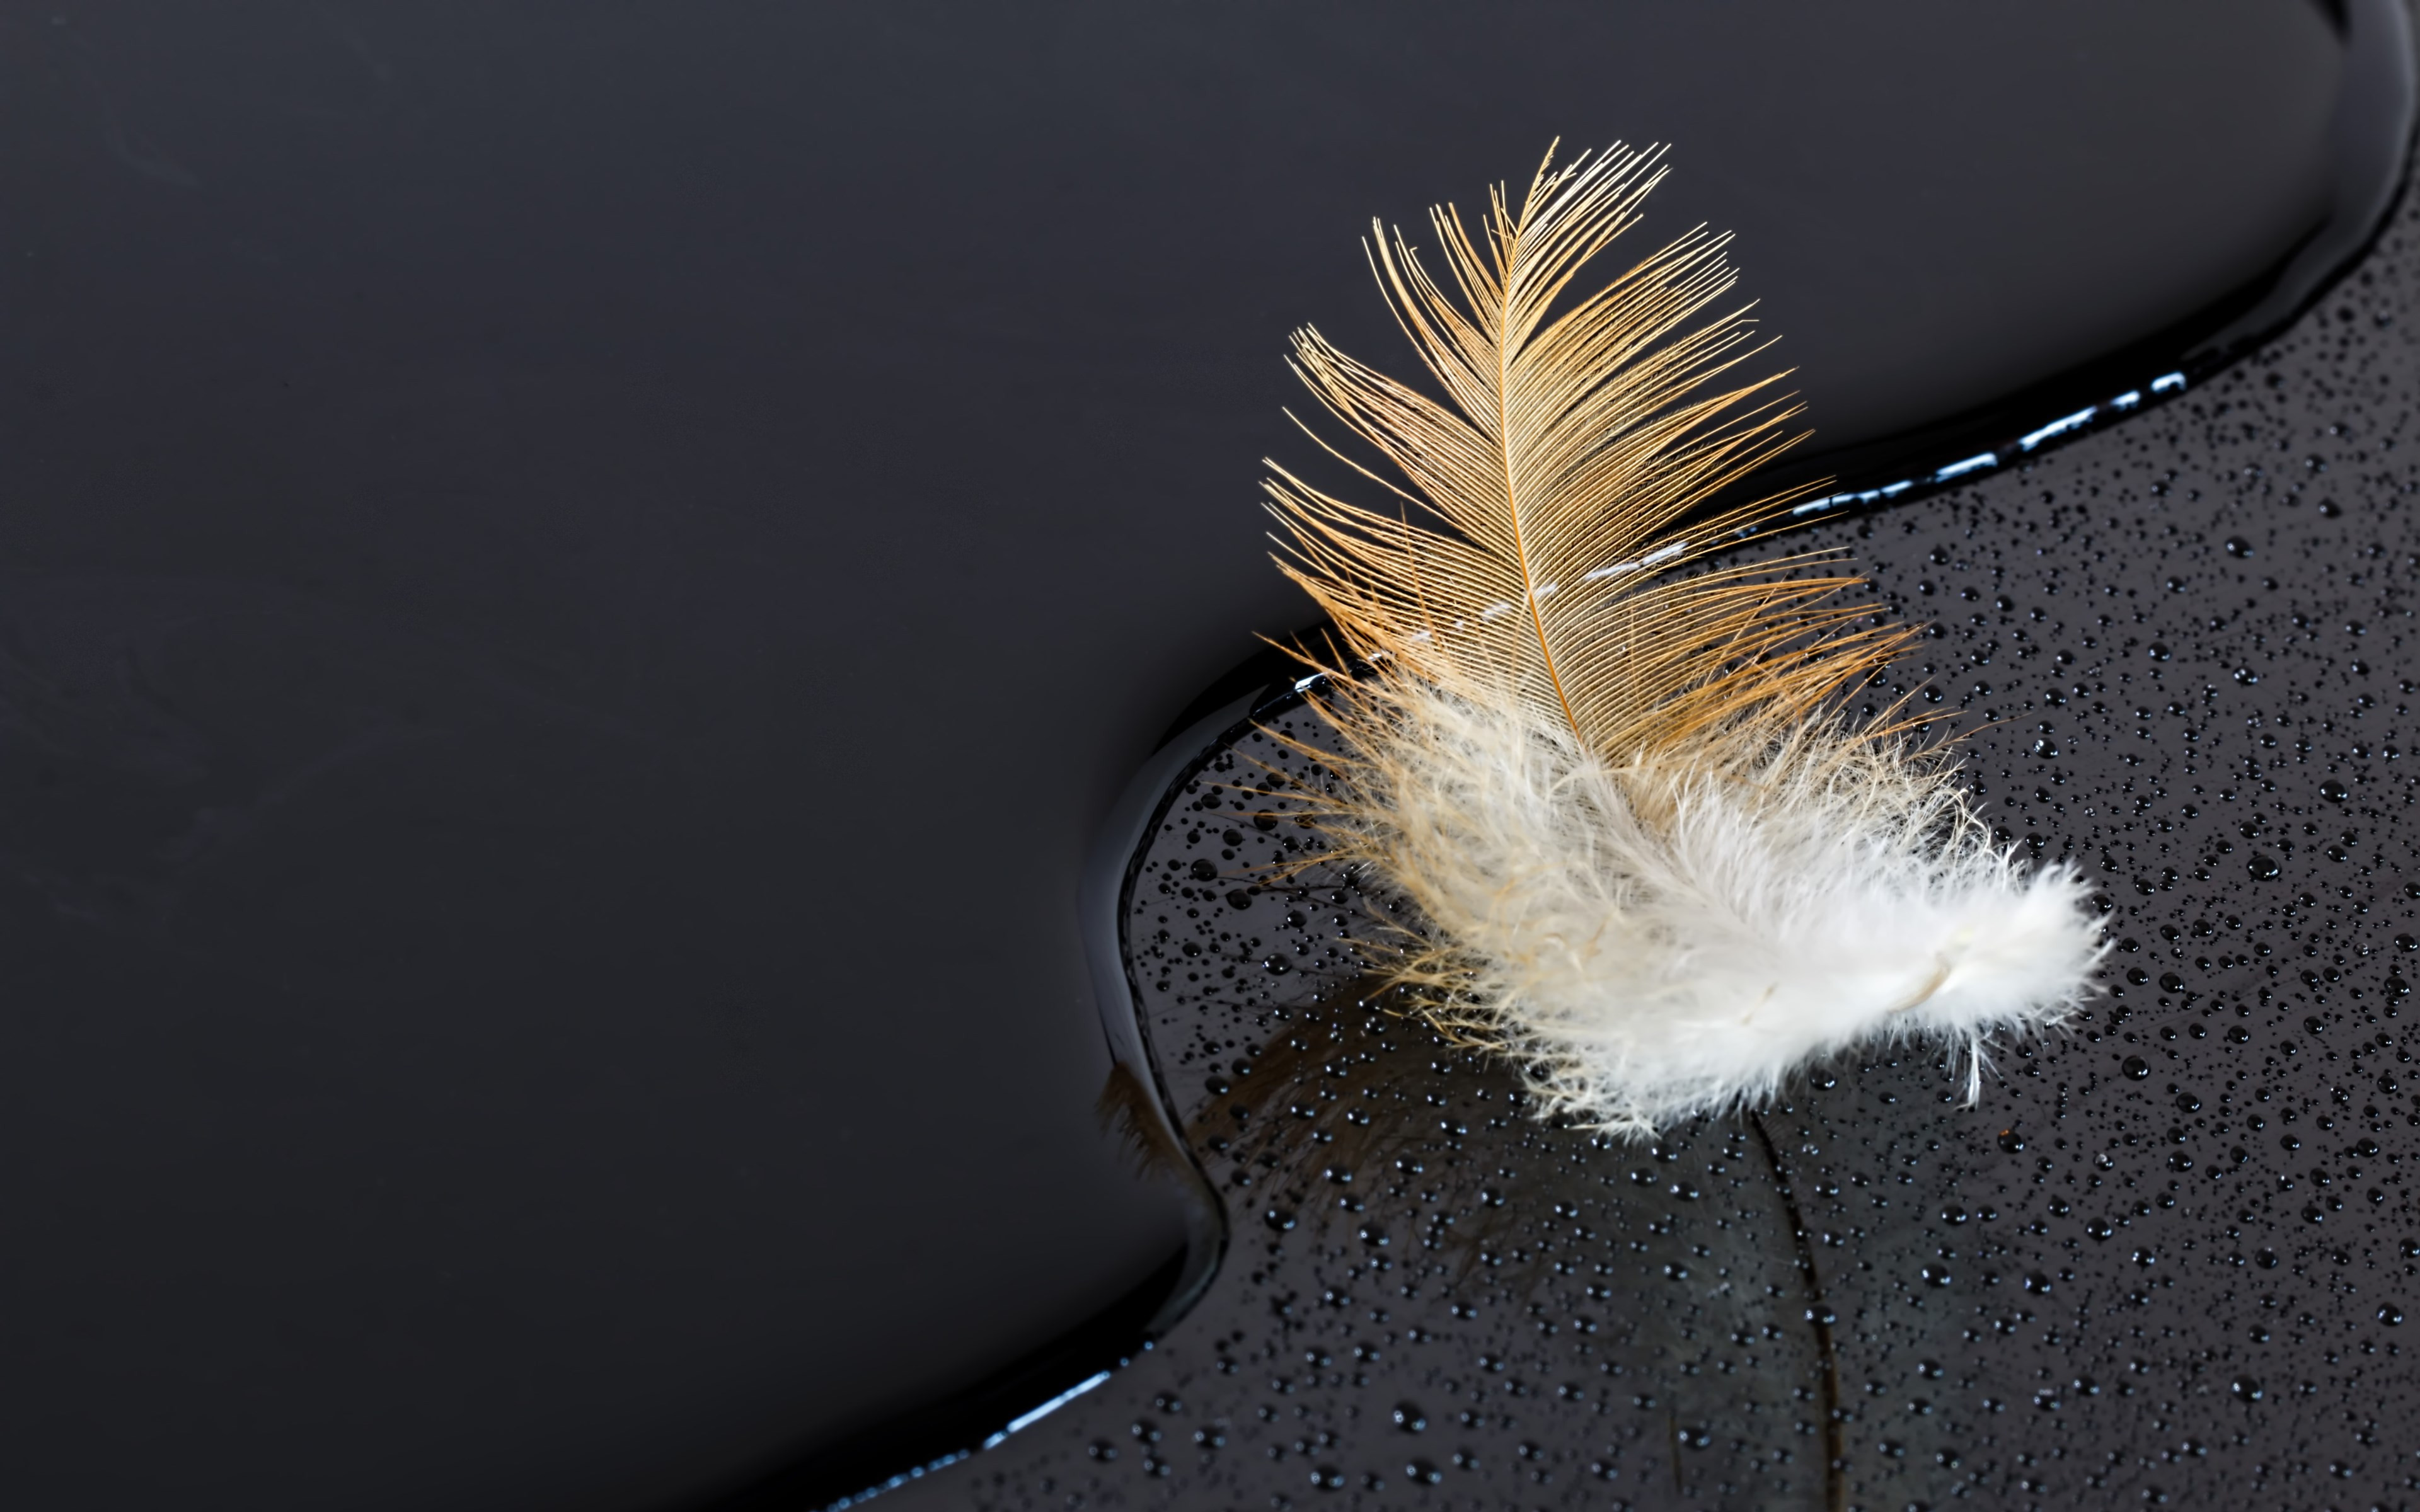 Dark surface with a feather on water wallpaper 3840x2400